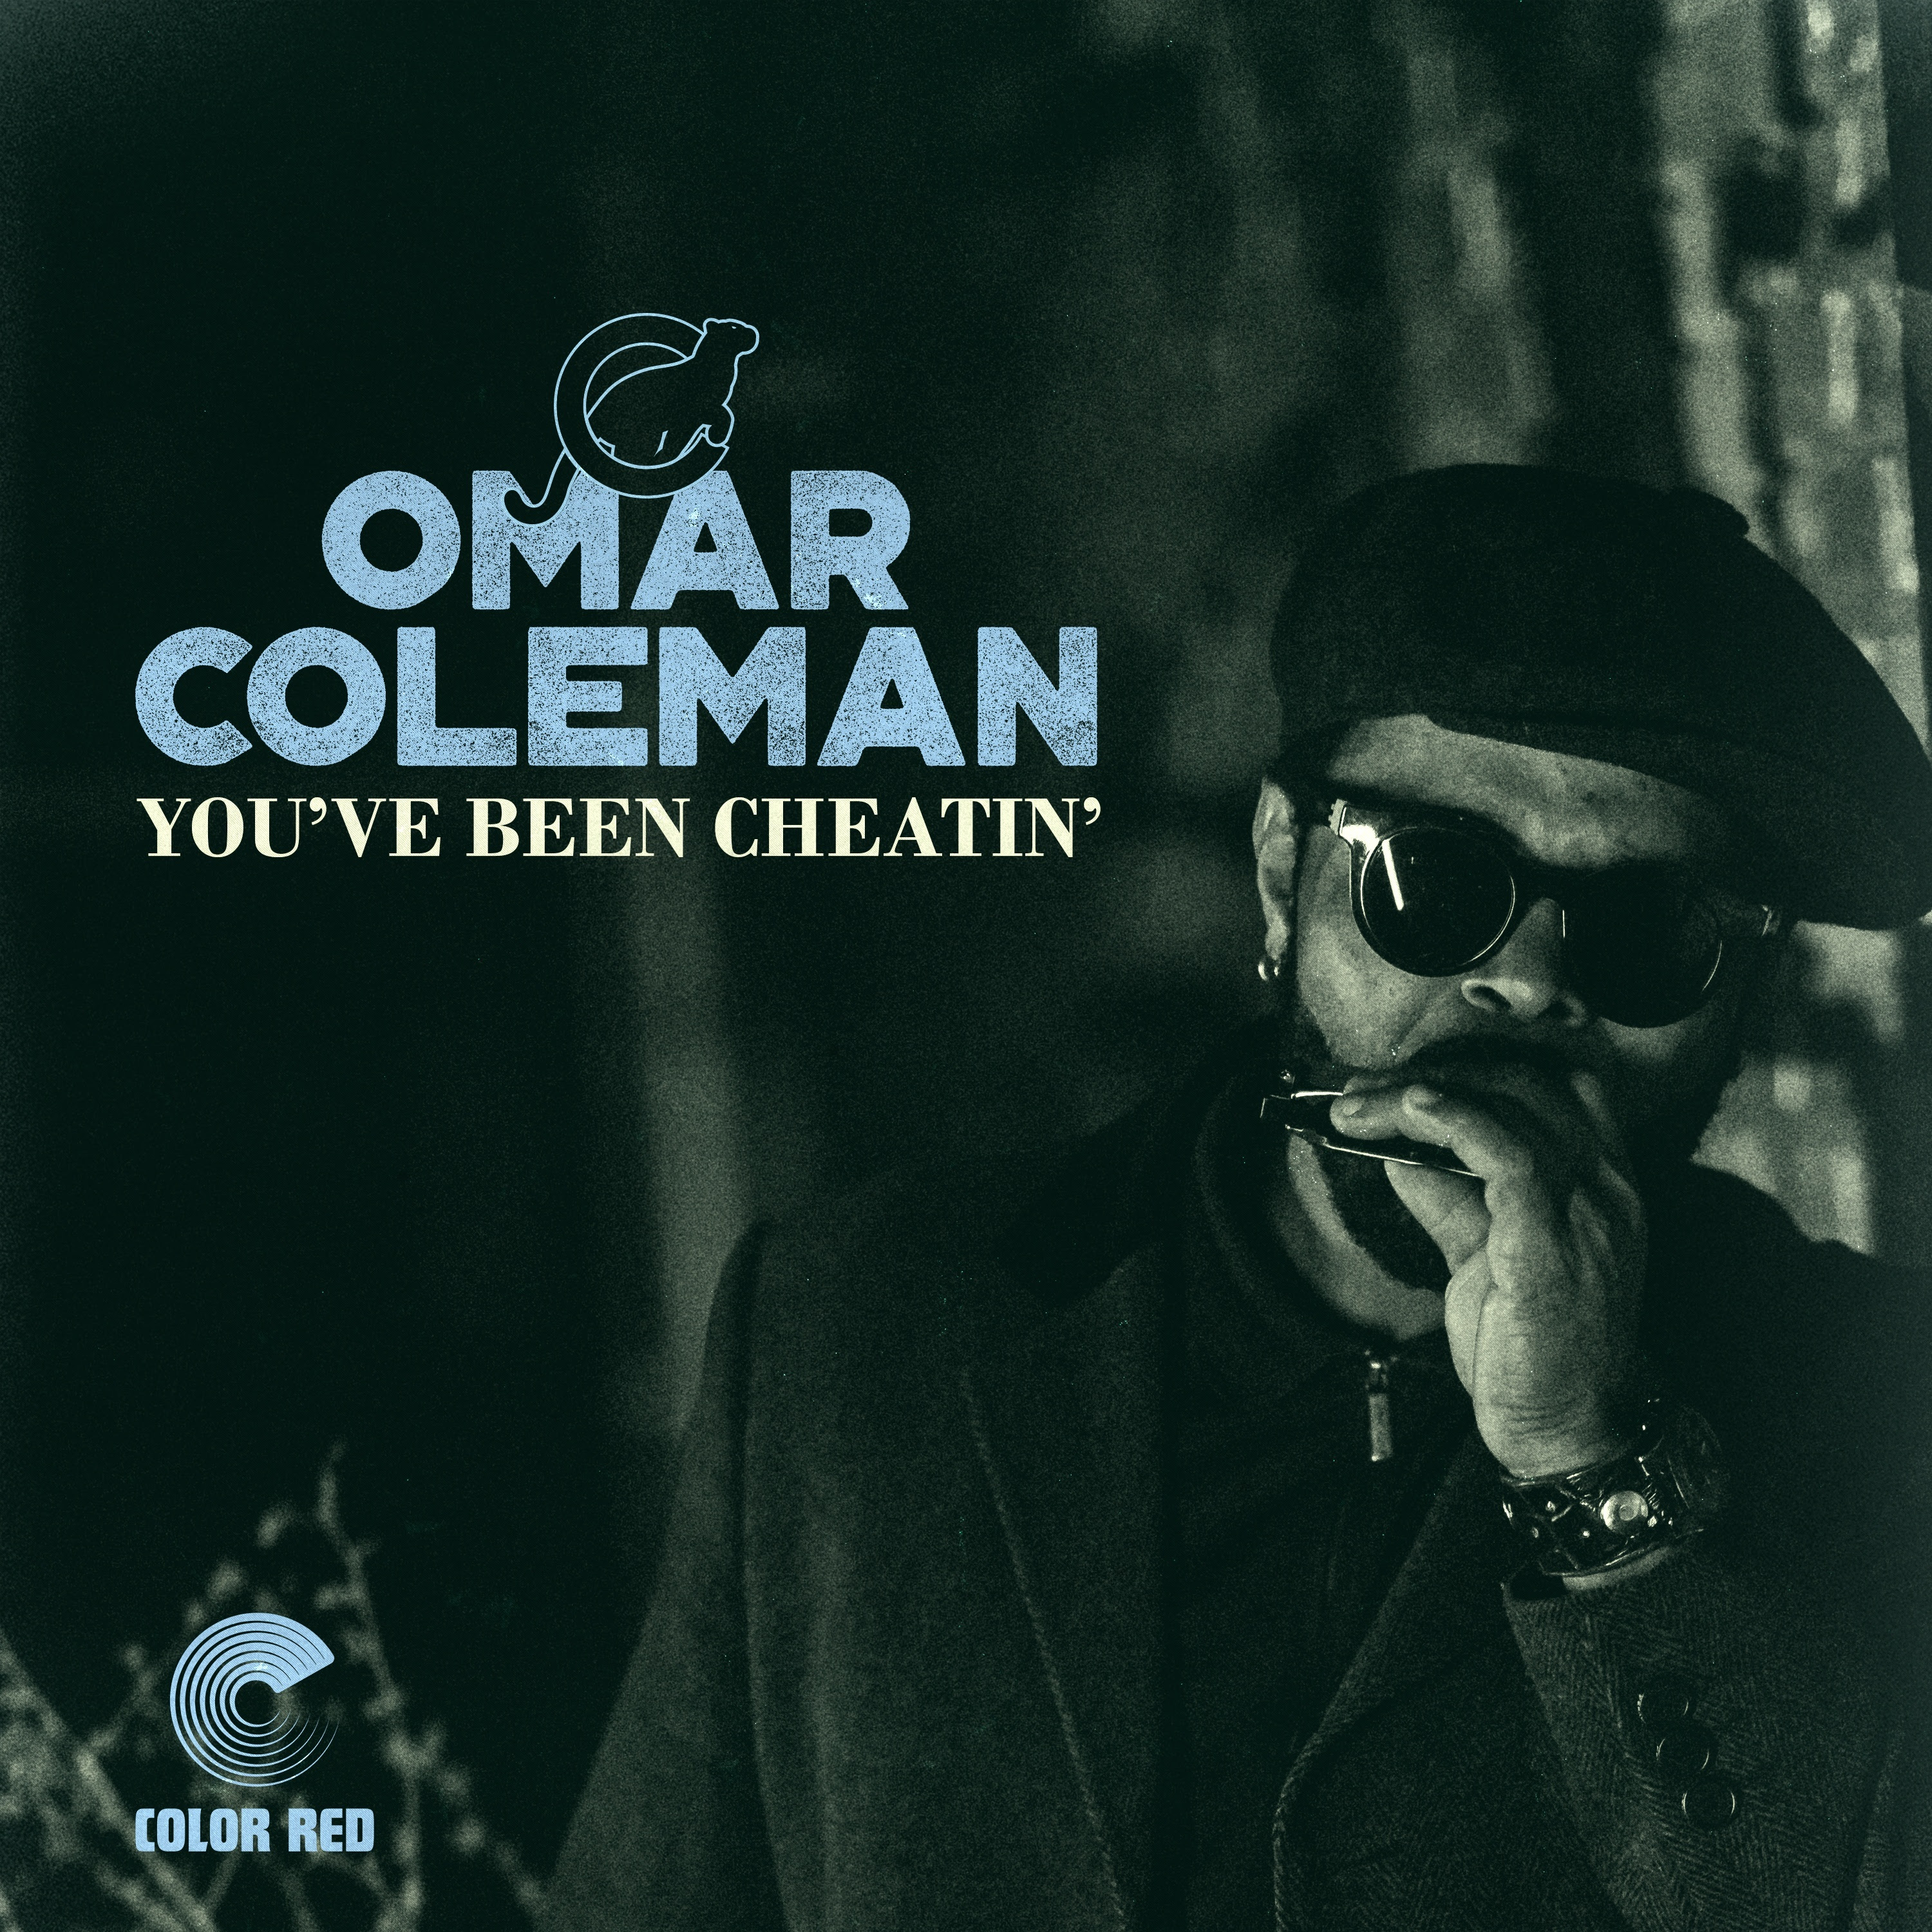 Omar Coleman & Eddie Roberts Collaborate on New Single "You've Been Cheatin'"